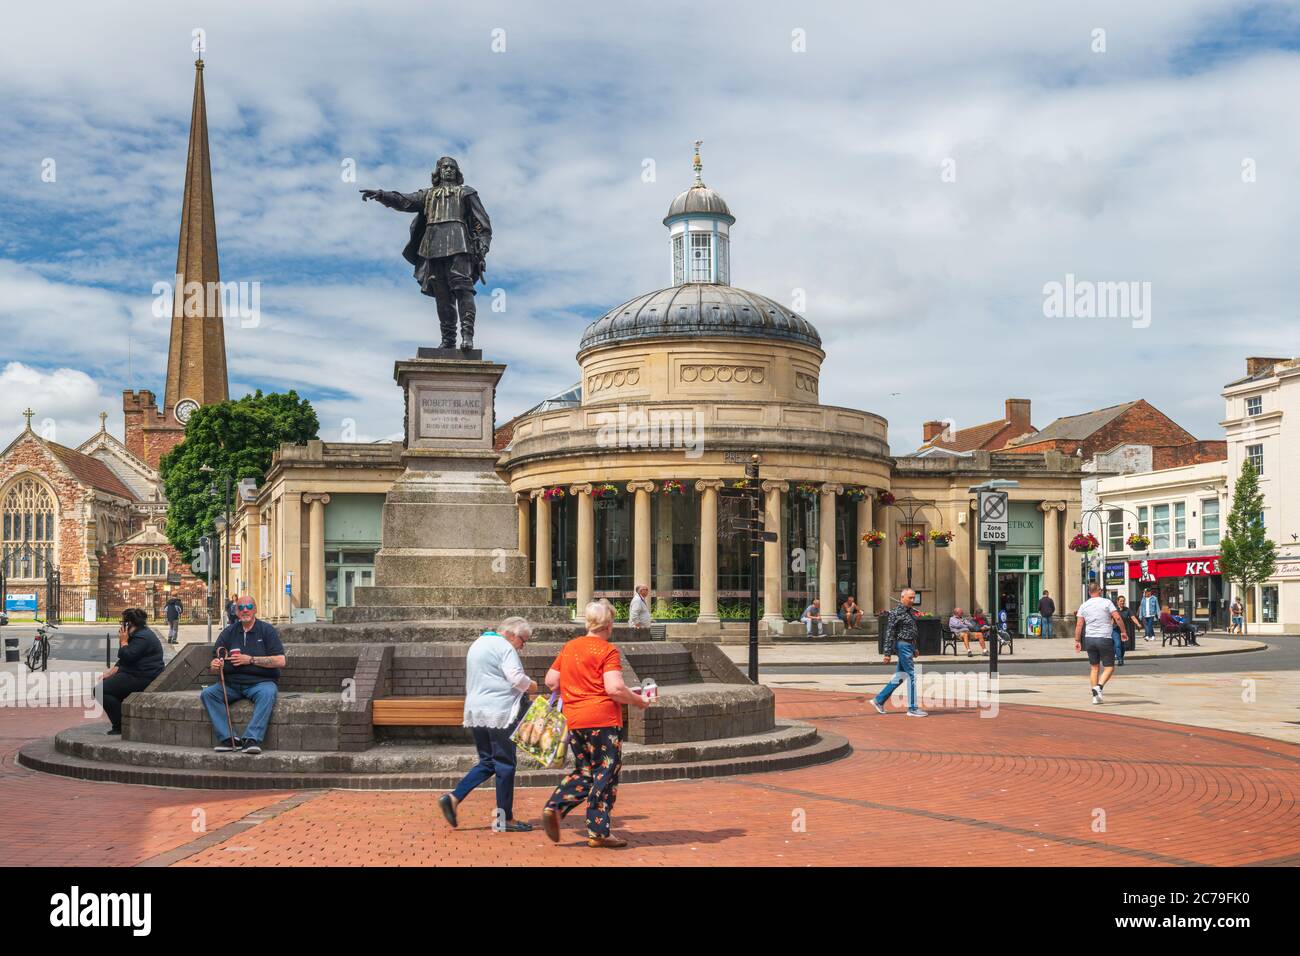 The centre of Bridgwater in Somerset on a summer's day. From left to right are The Church of Saint Mary, the statue of Robert Blake and the Corn Excha Stock Photo